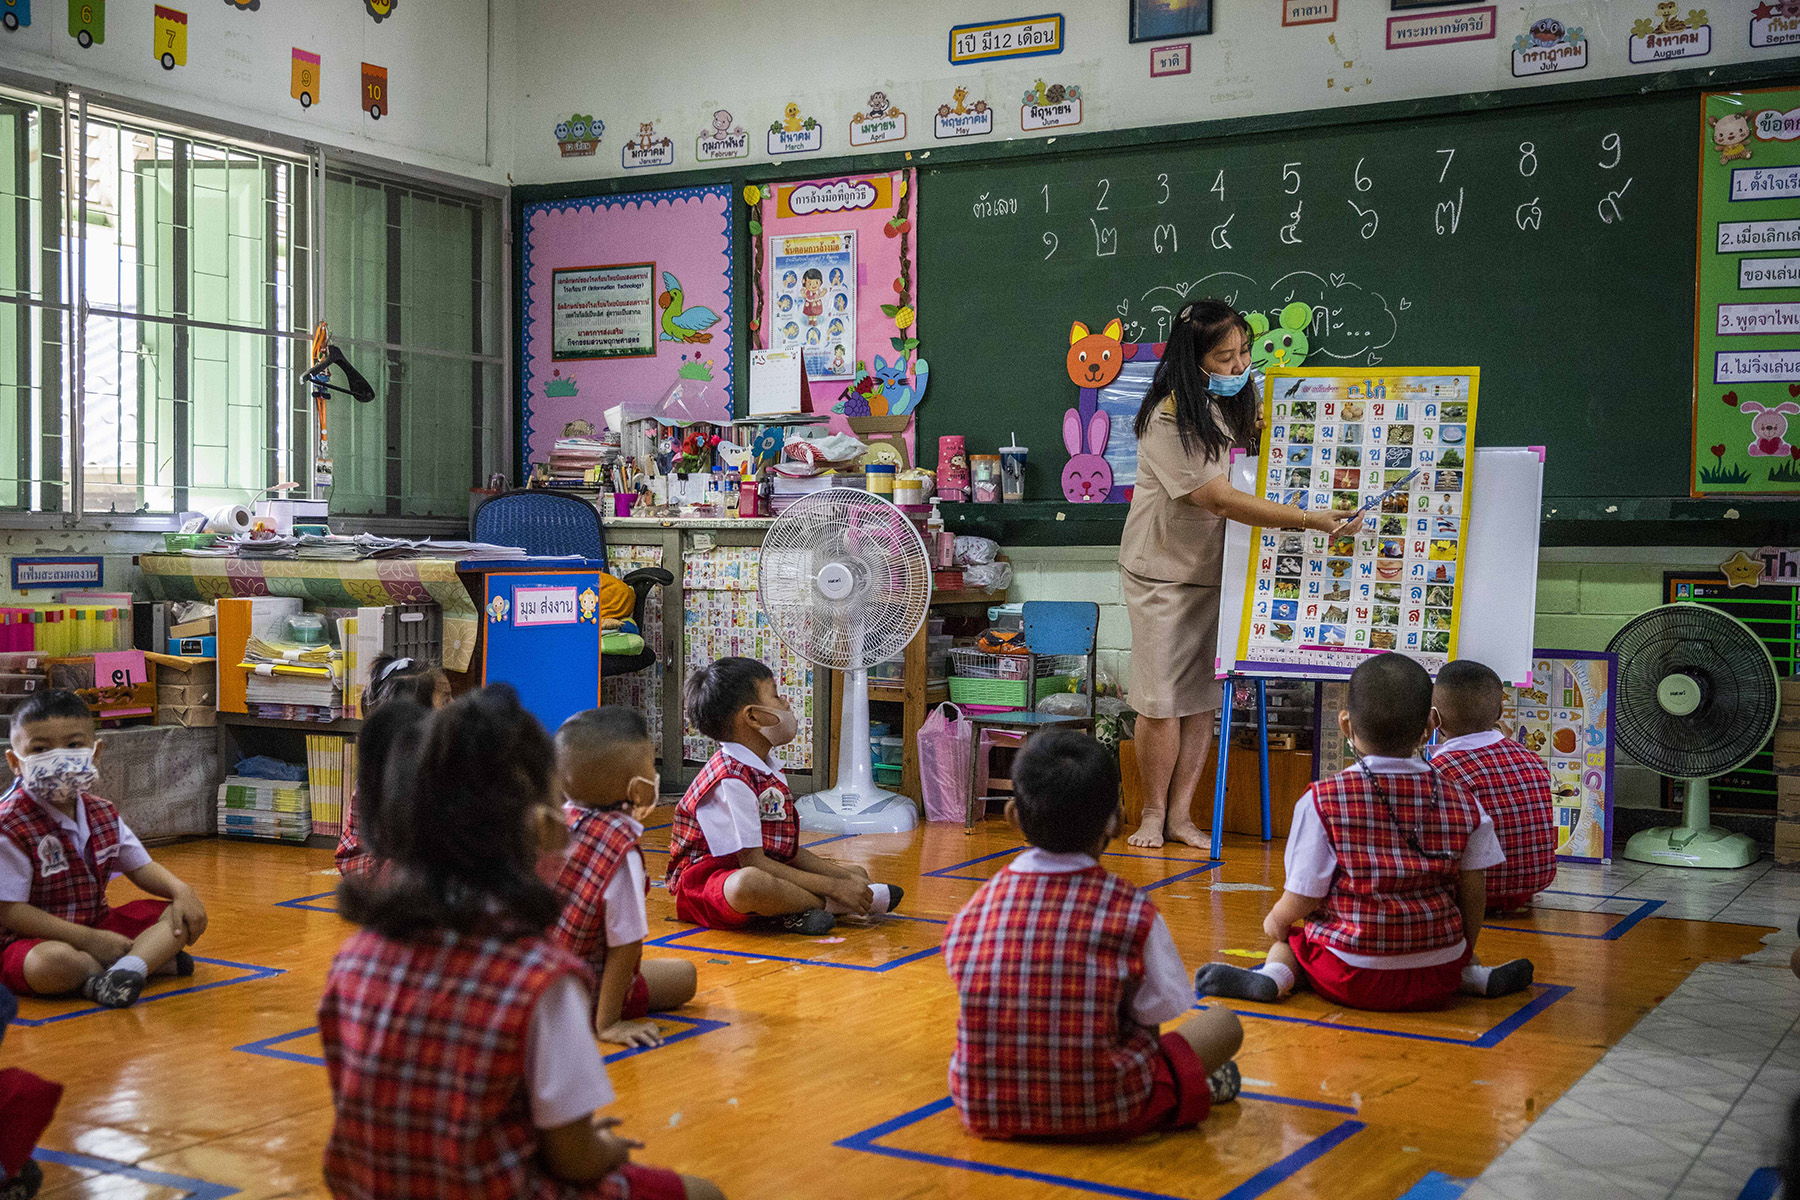 kindergarten pupils sit on the floor on their mats and listen to the teacher giving a lesson